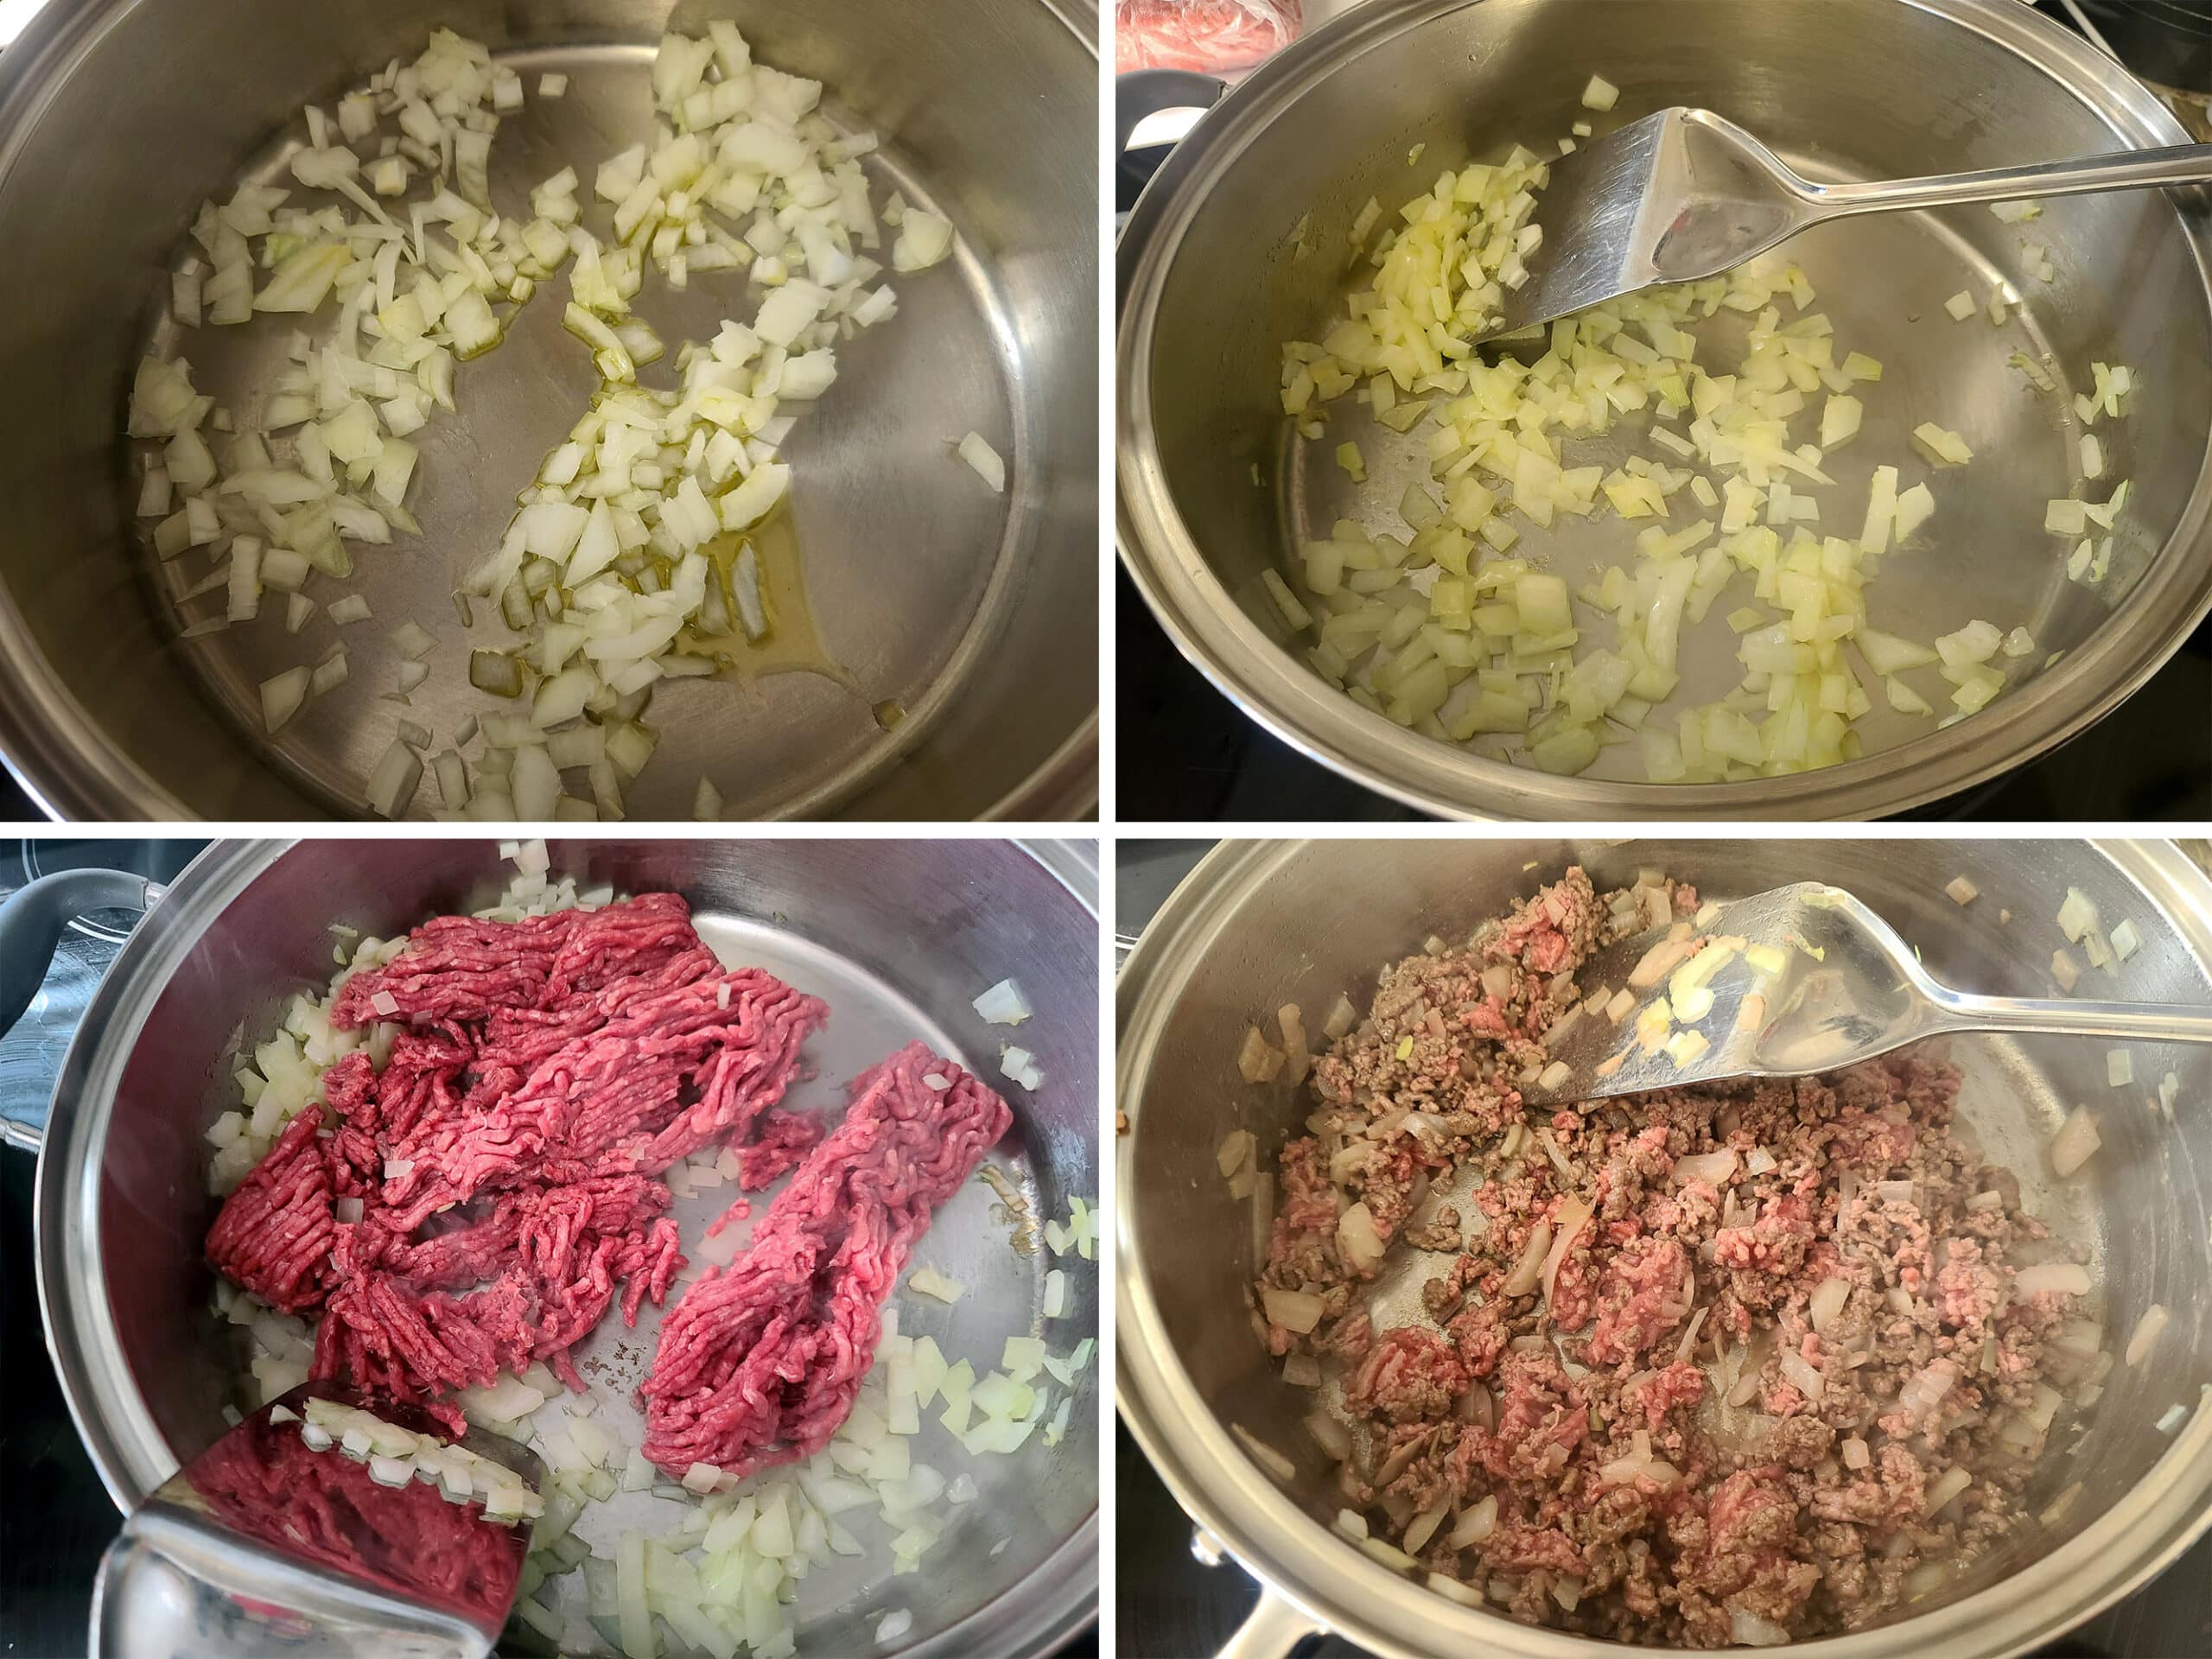 A 4 part image showing the onions being sauteed, then the ground beef being added and browned.